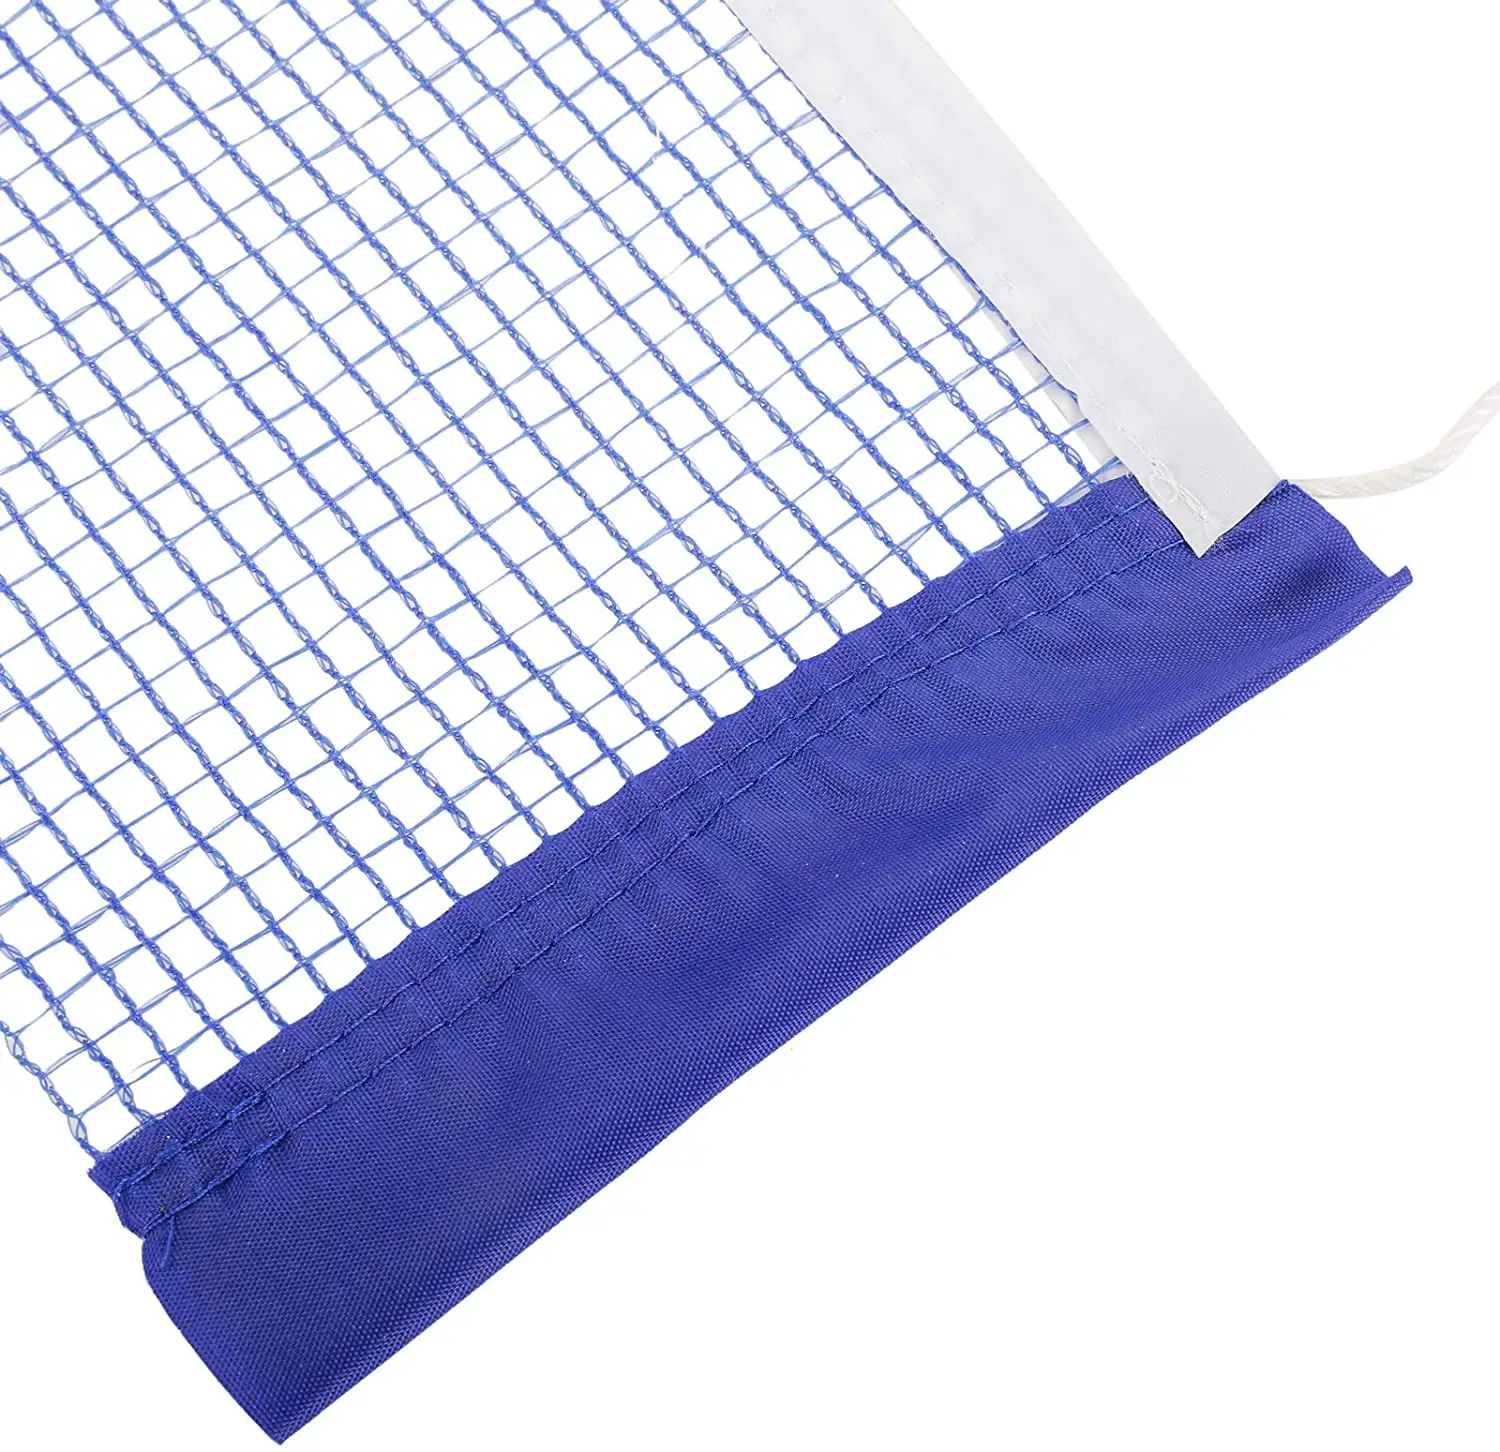 High Quality Table Tennis Net Home Playing Pingpong Table Tennis Accessories Practice Nets